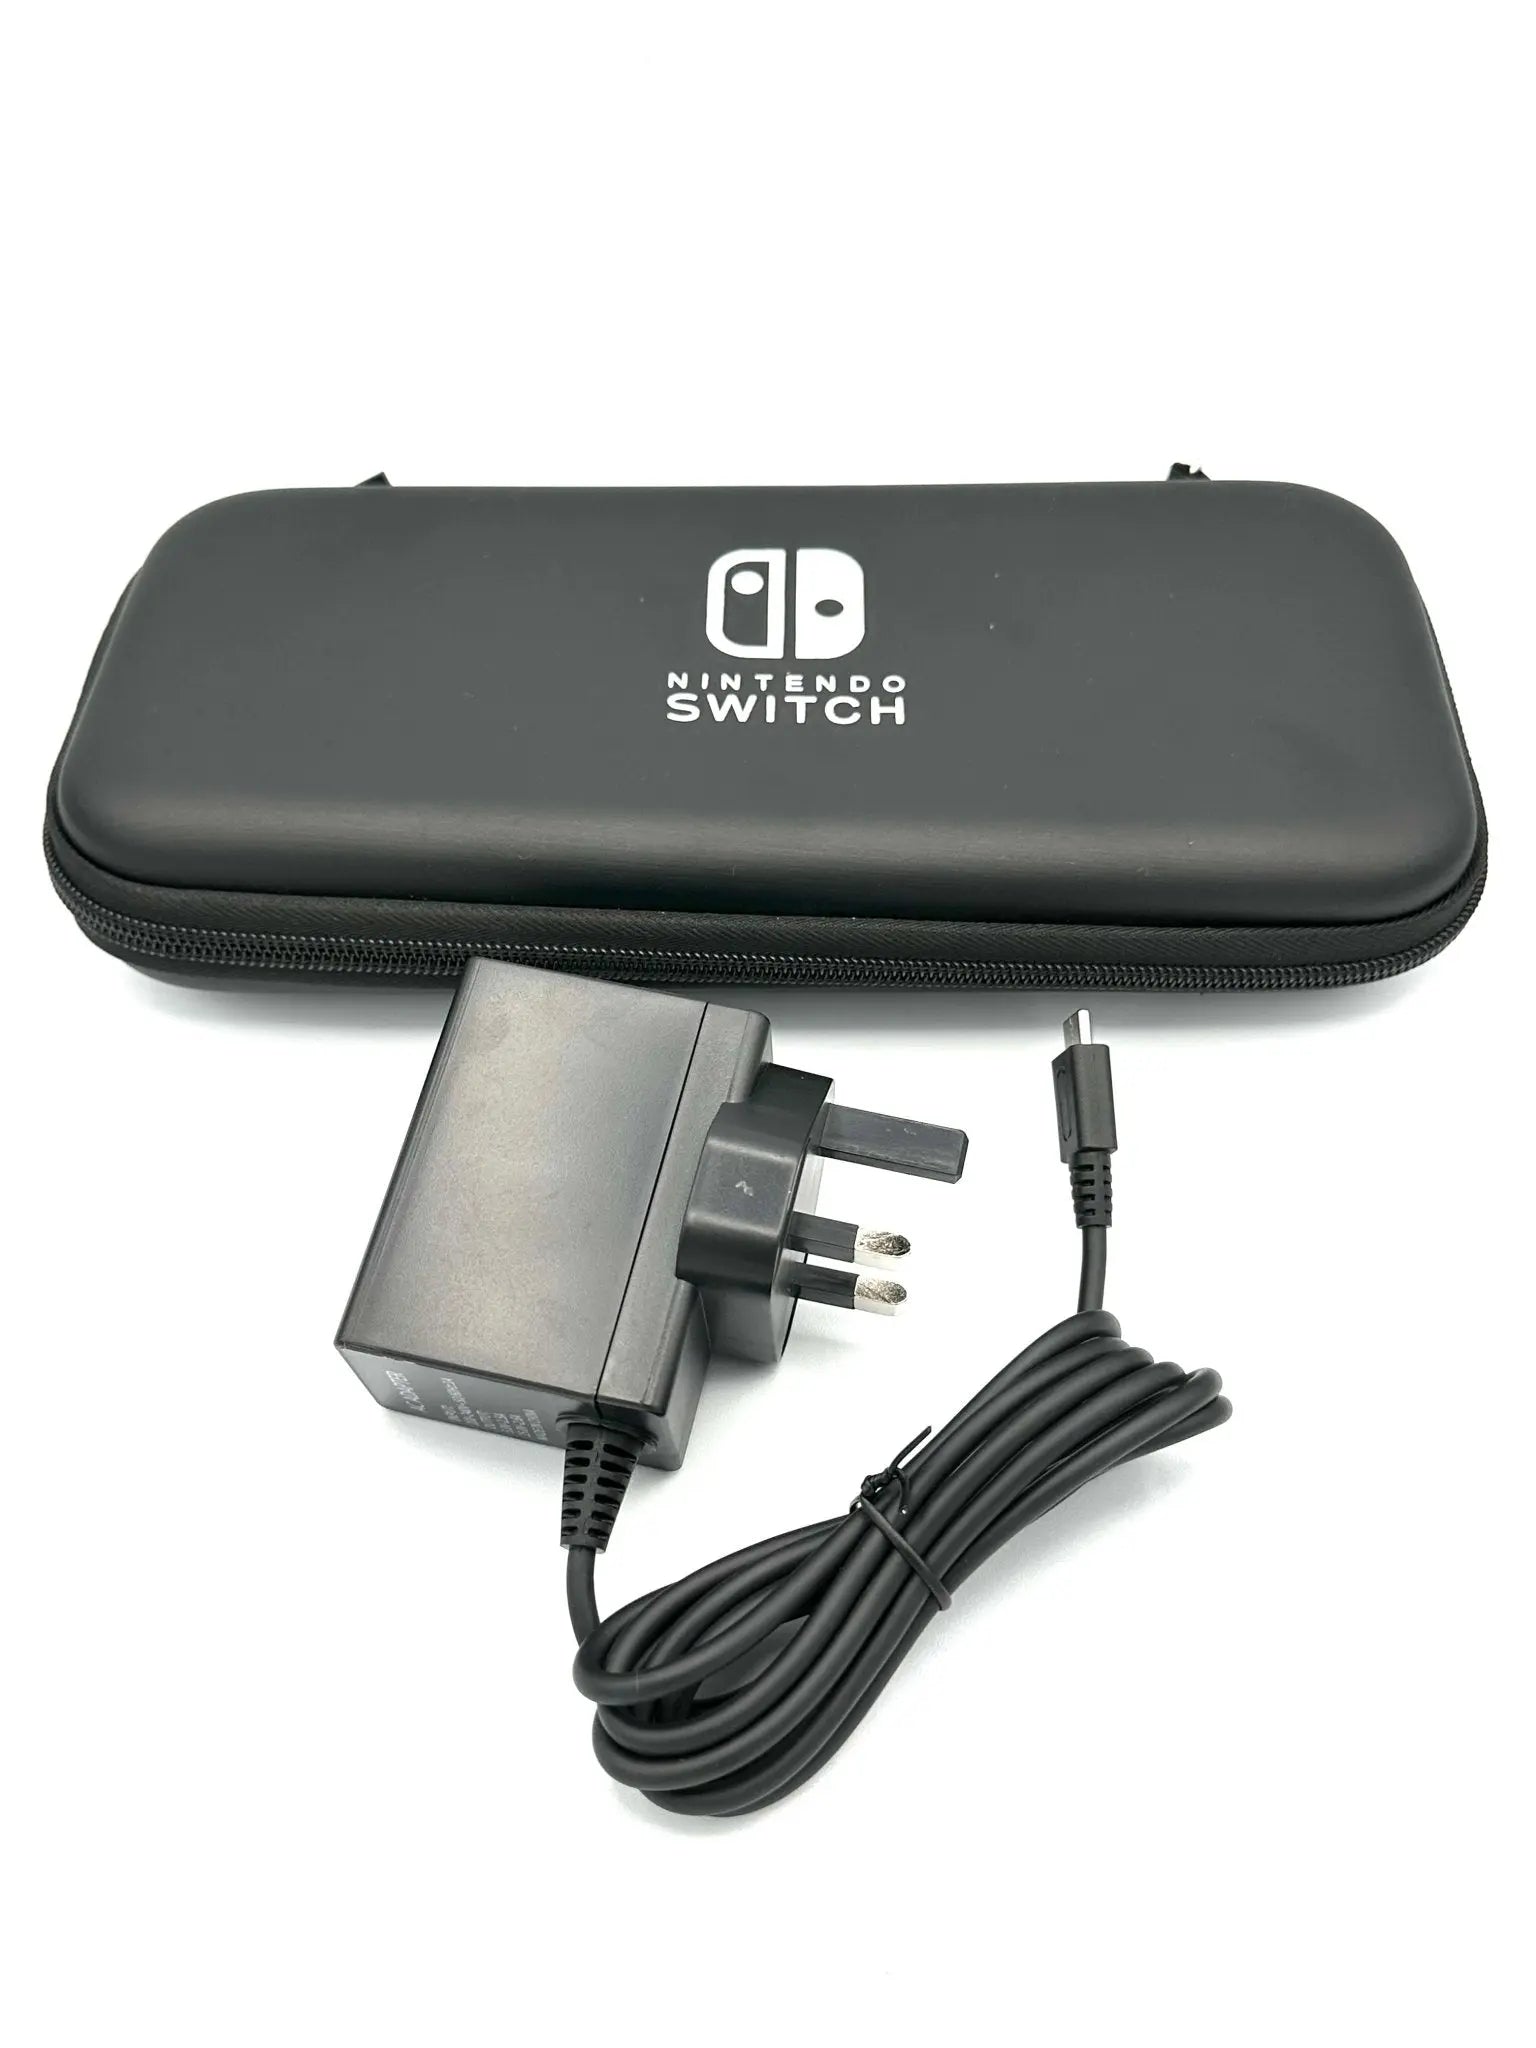 Charger & Case For Nintendo Console